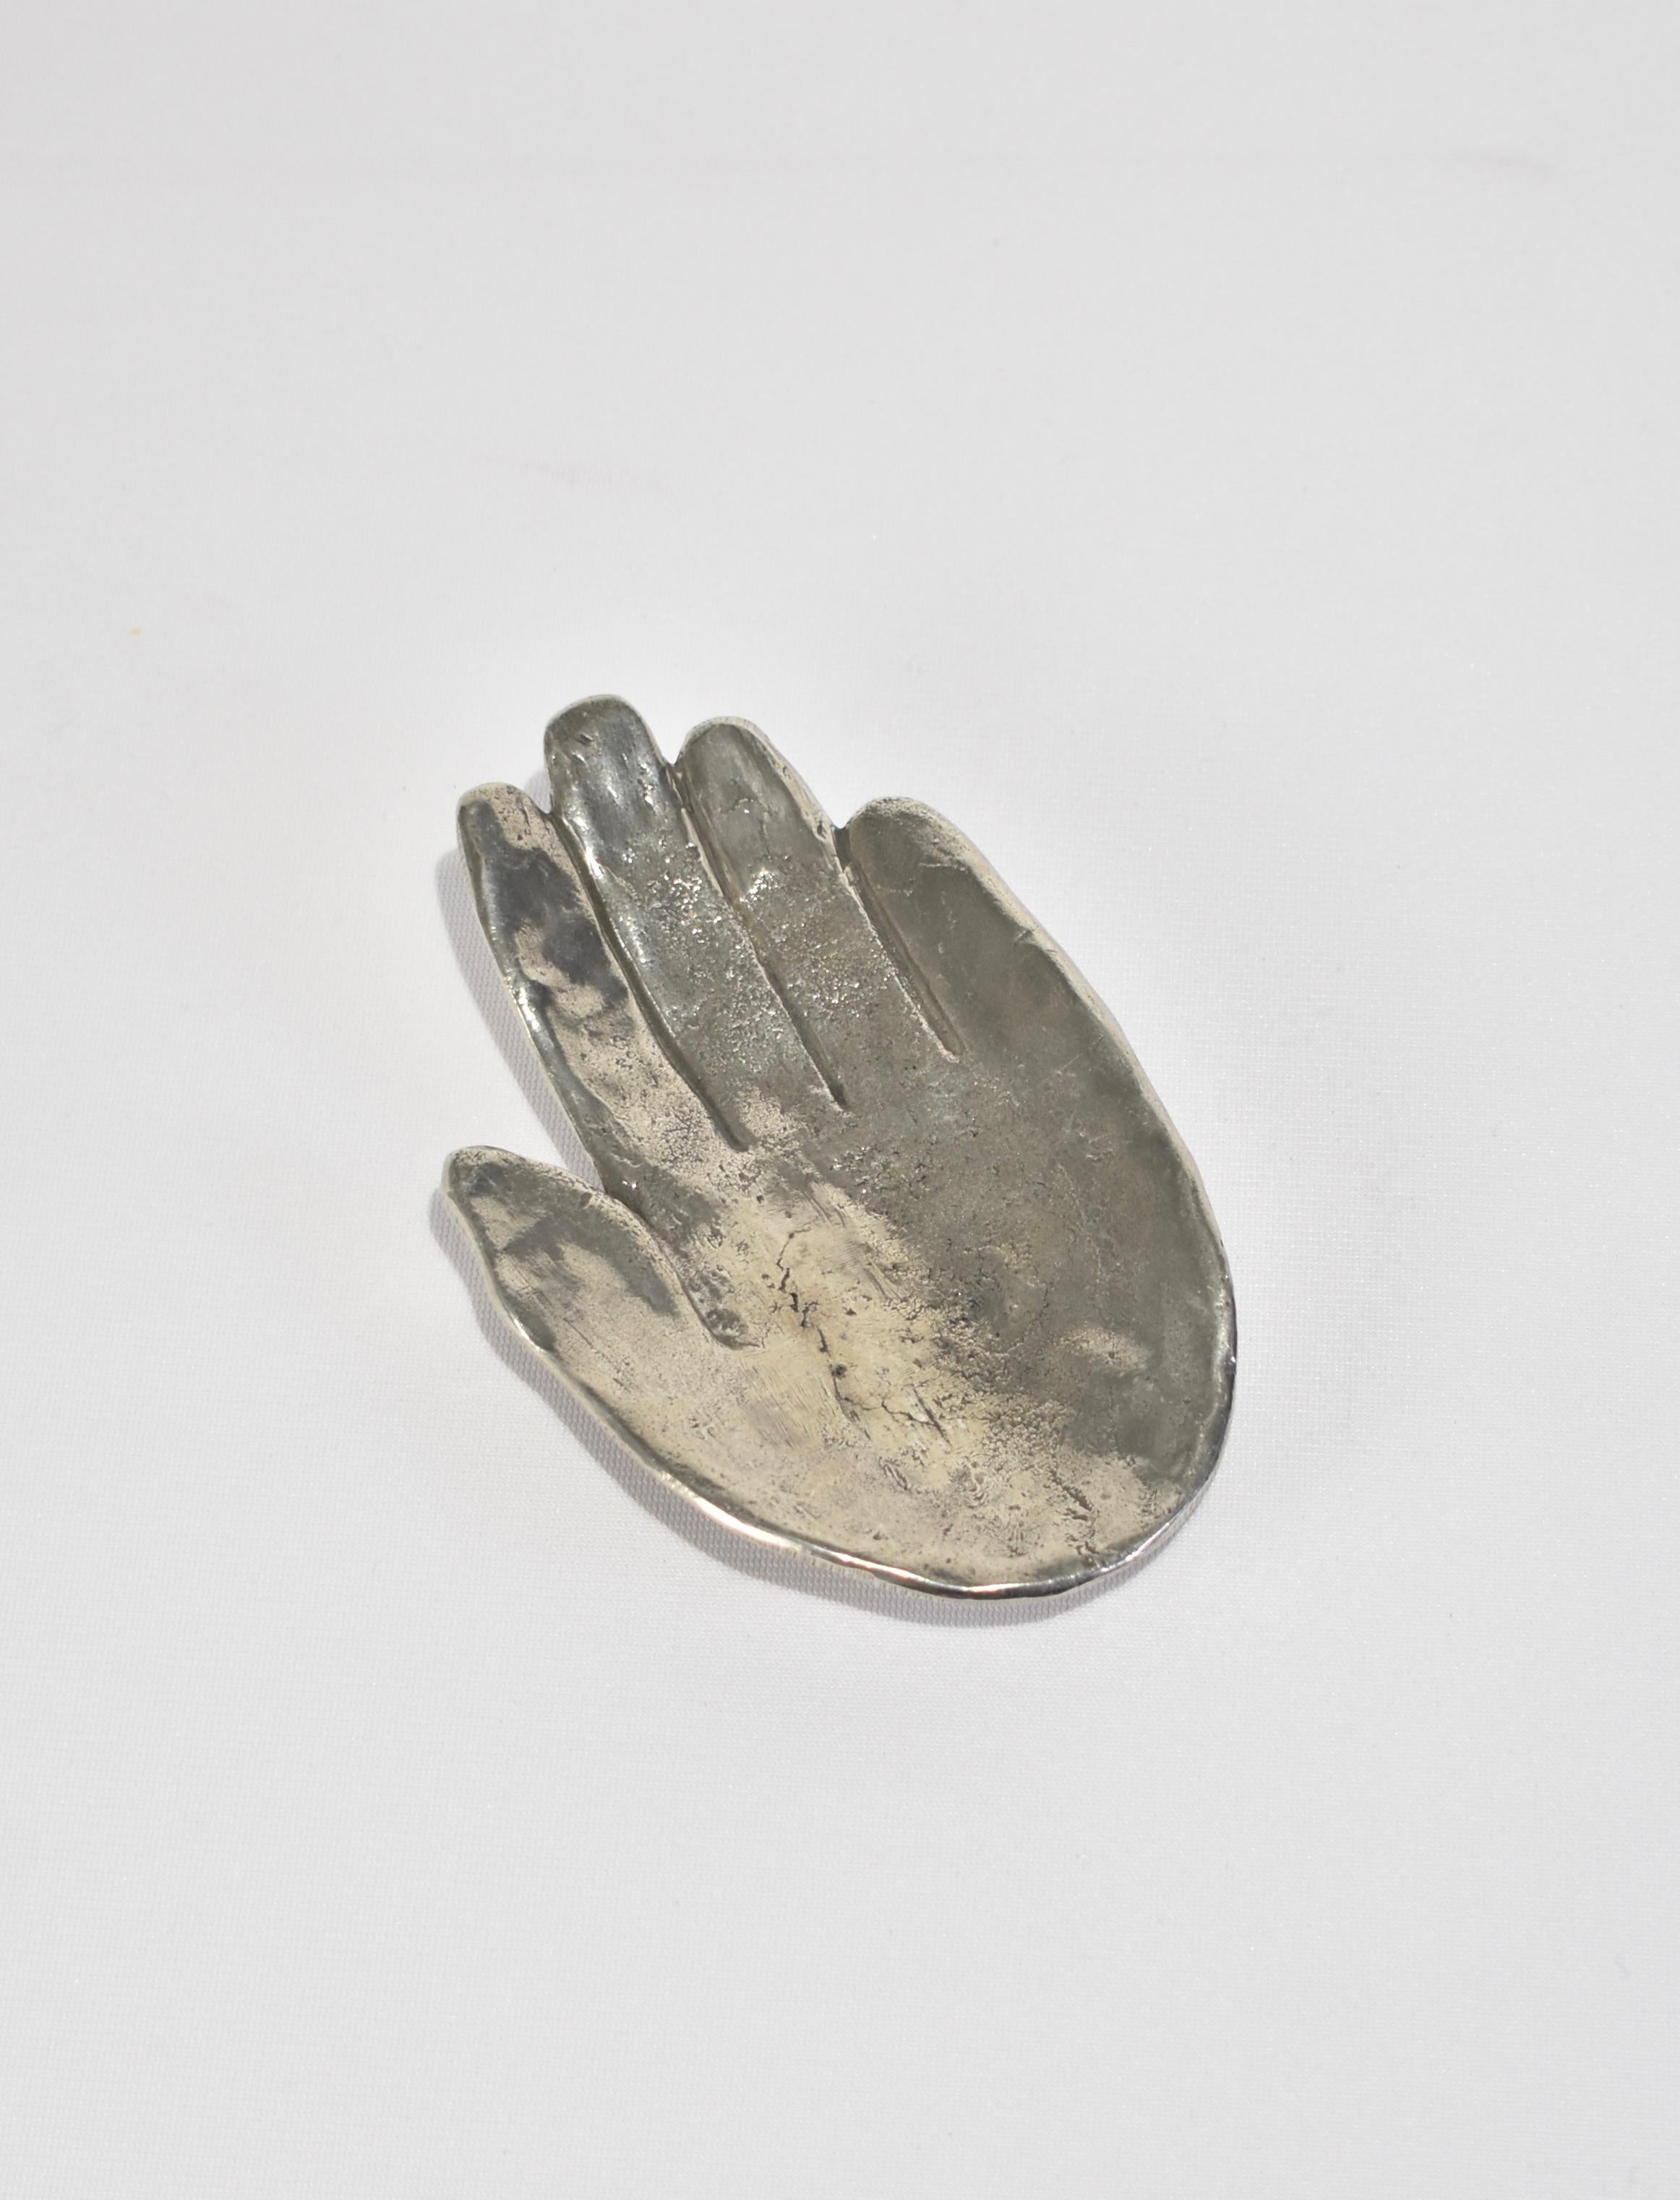 Rare, solid pewter life-size hand catchall by Patrick Meyer.